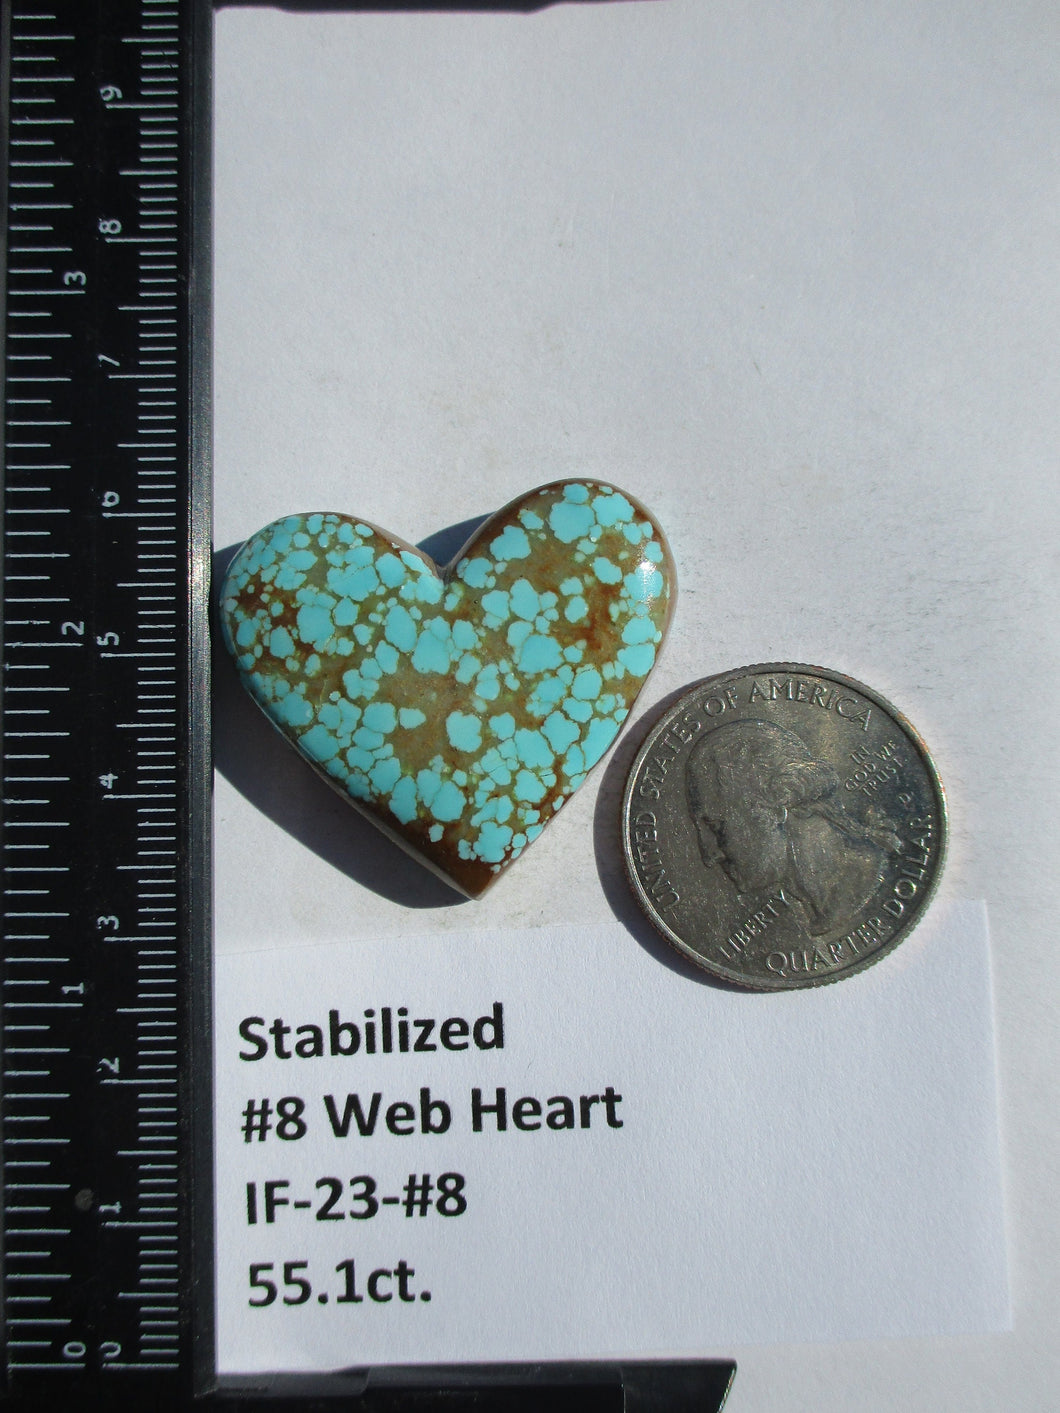 55.1 ct (30x34x8 mm) Stabilized #8 Web Turquoise Heart Cabochon Gemstone, IF 23